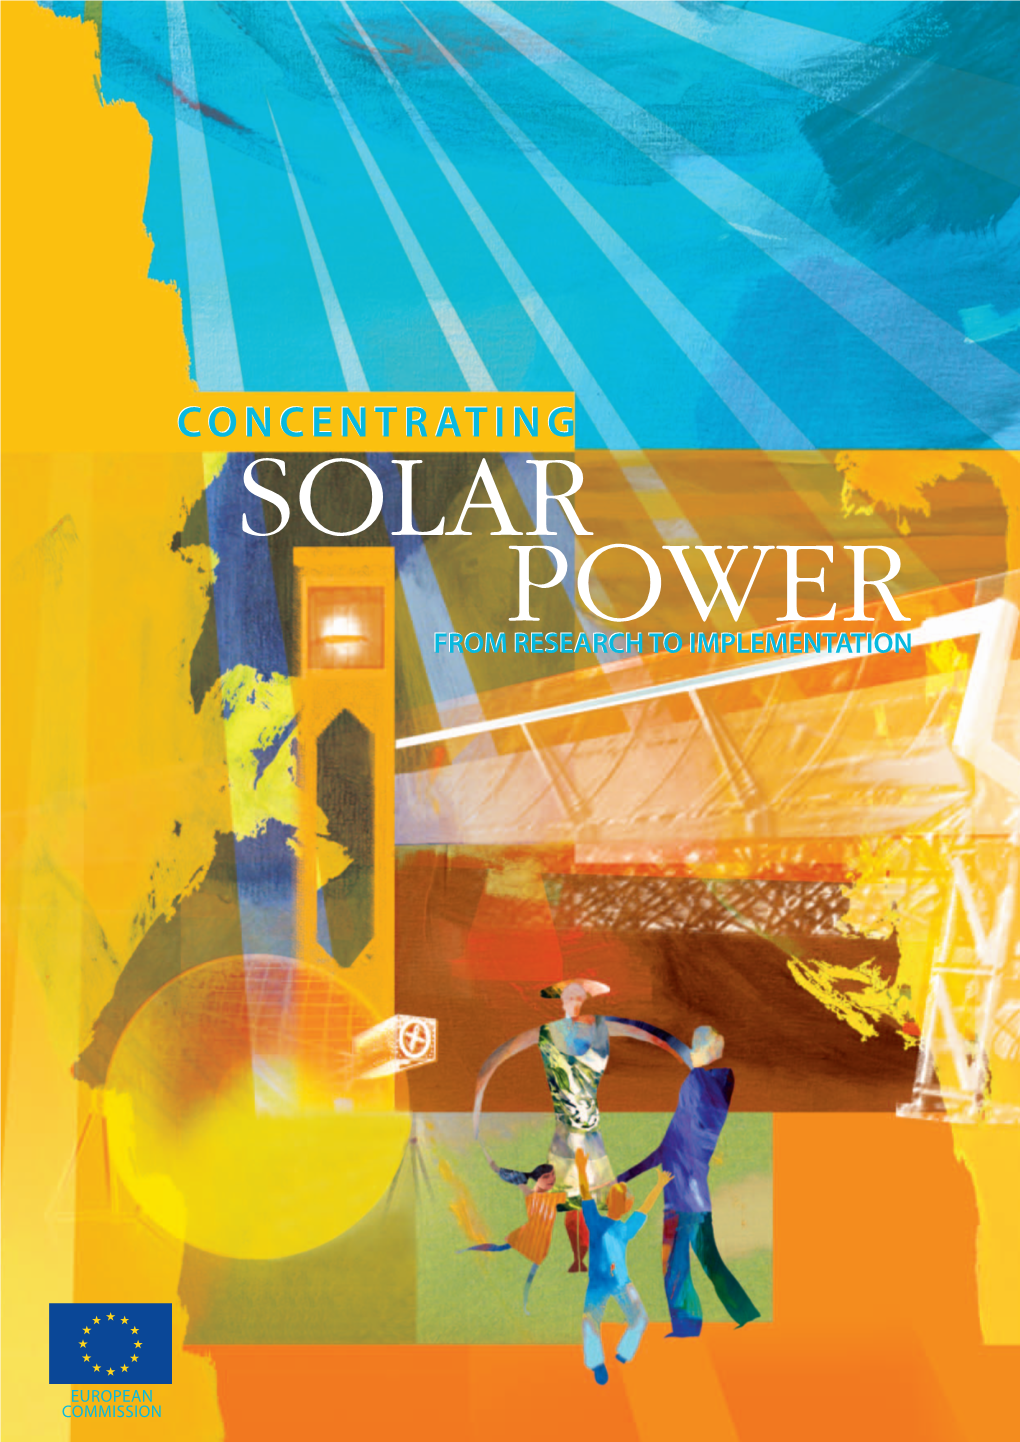 Concentrating Solar Power – from Research to Implementation